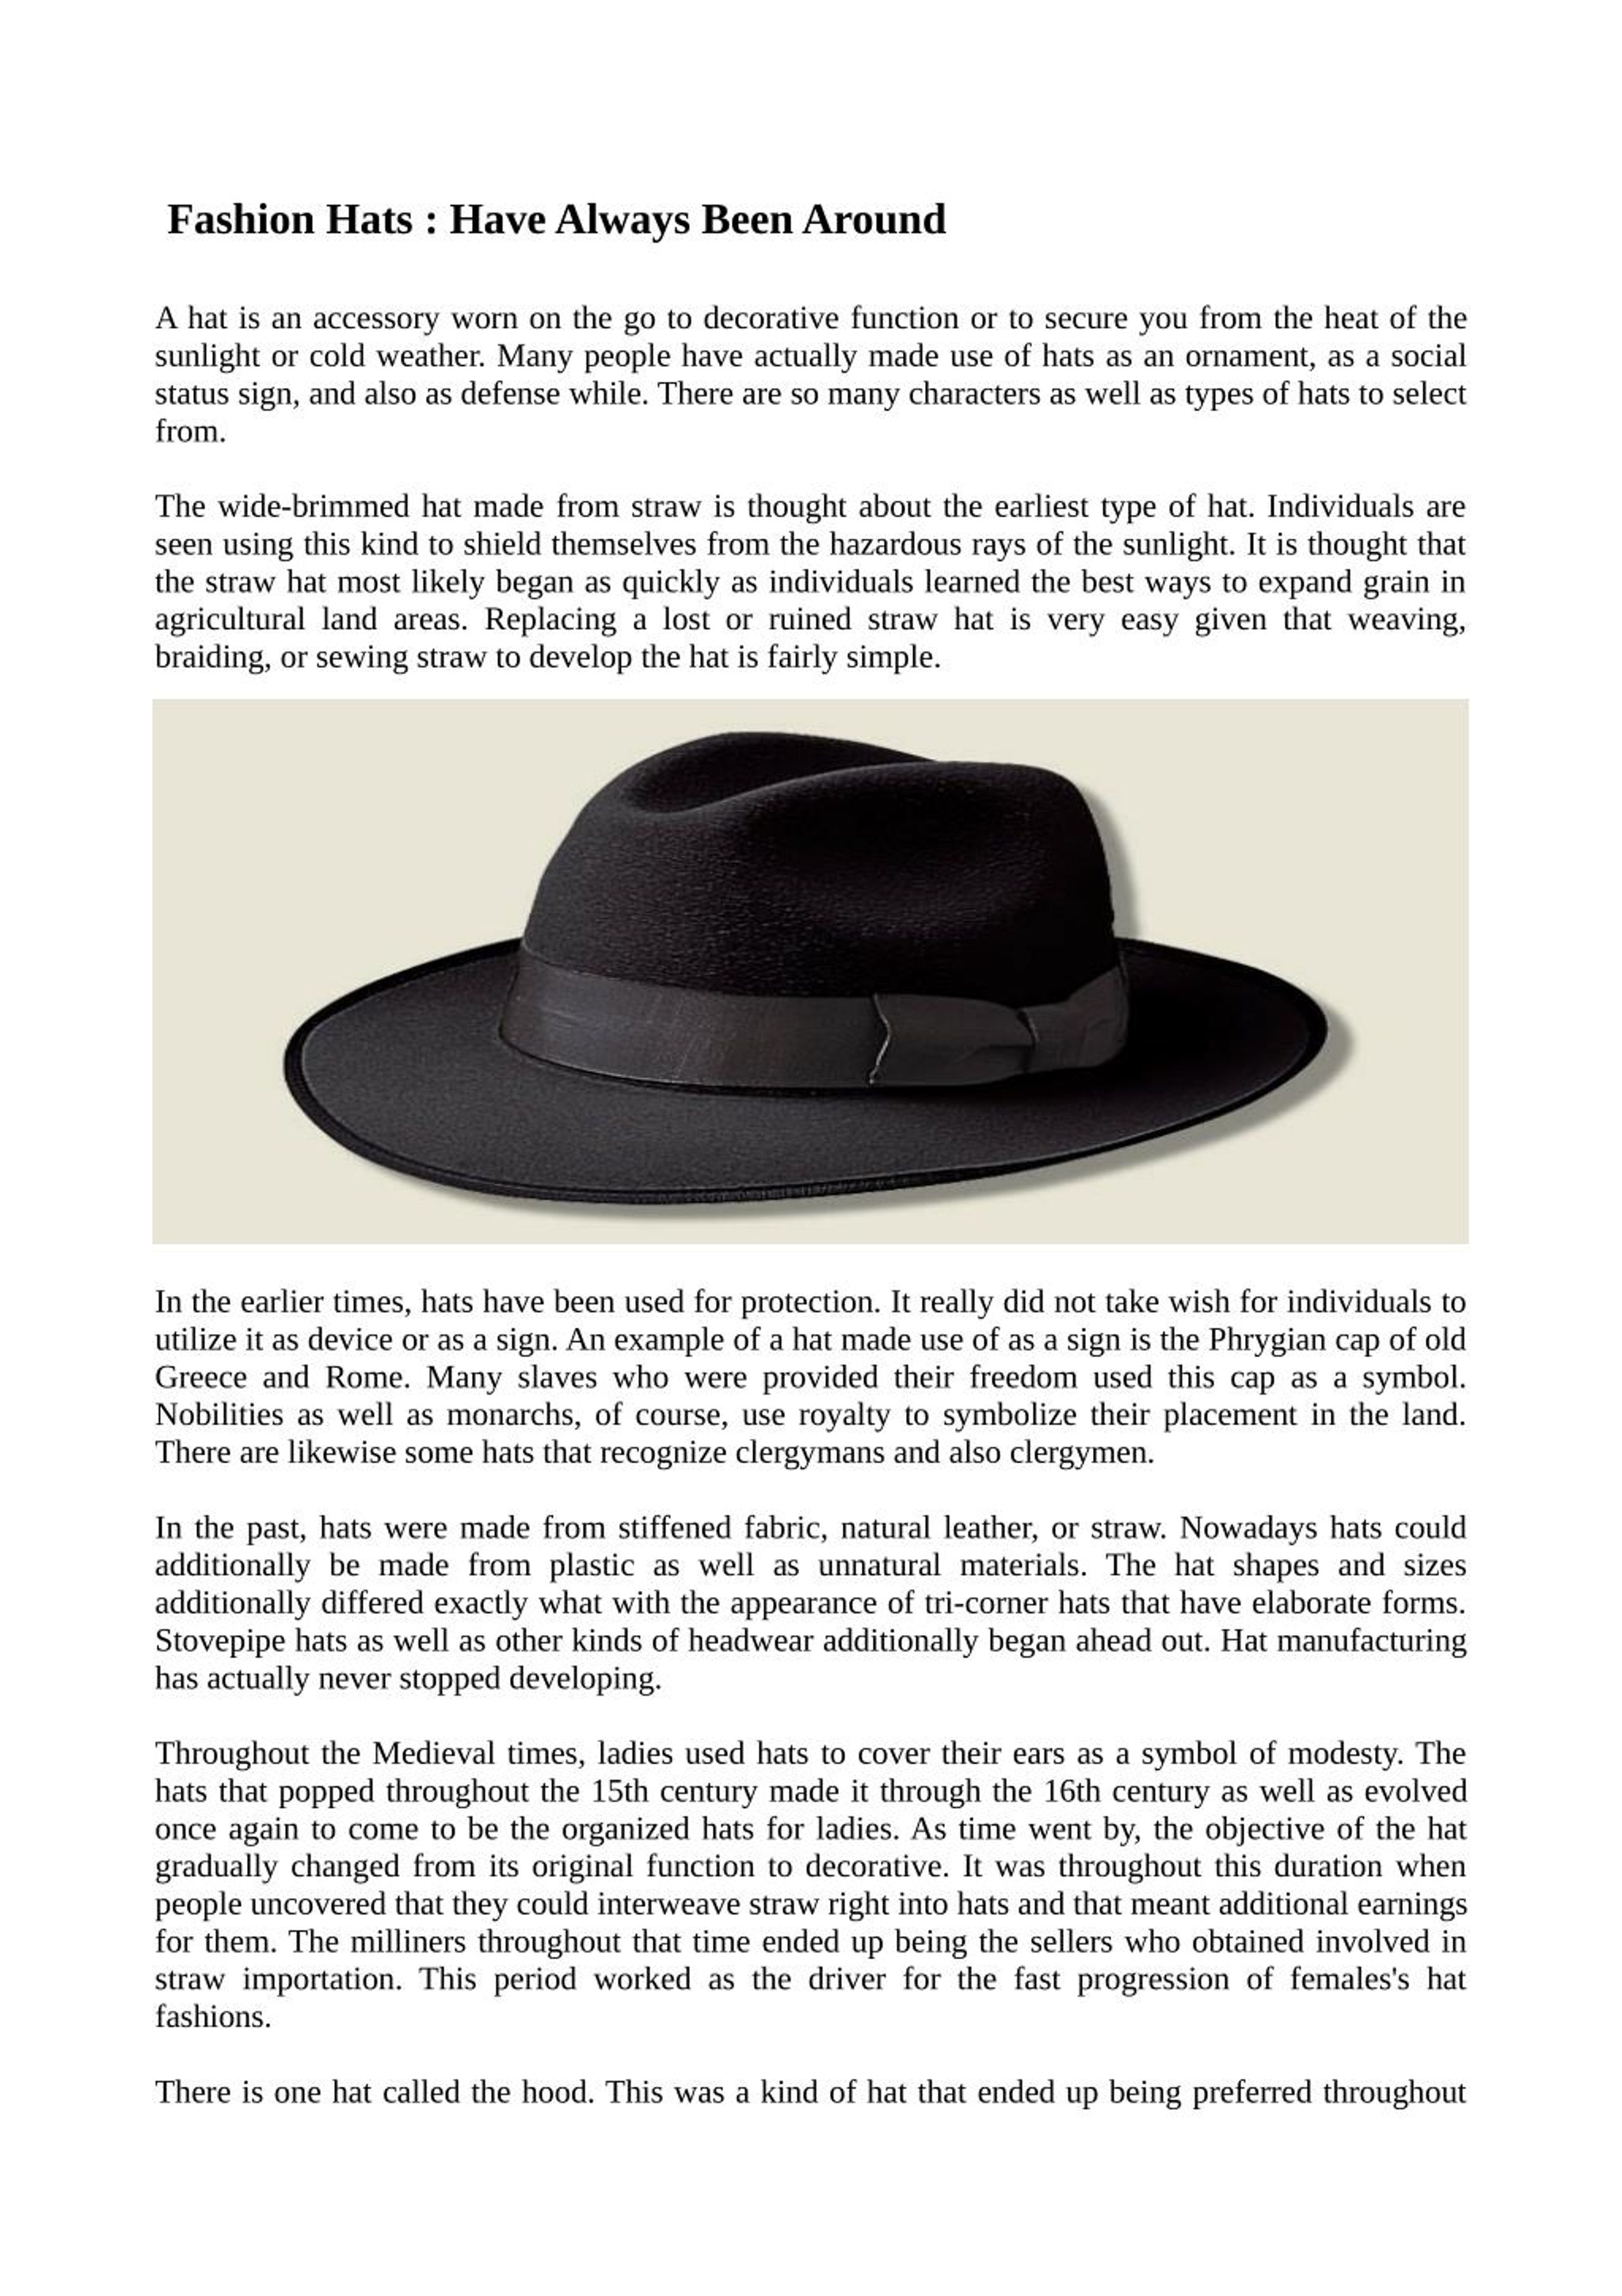 Wears a hat перевод. Kinds of hats. Different hats in English. Types of hats. Types of hats in English.